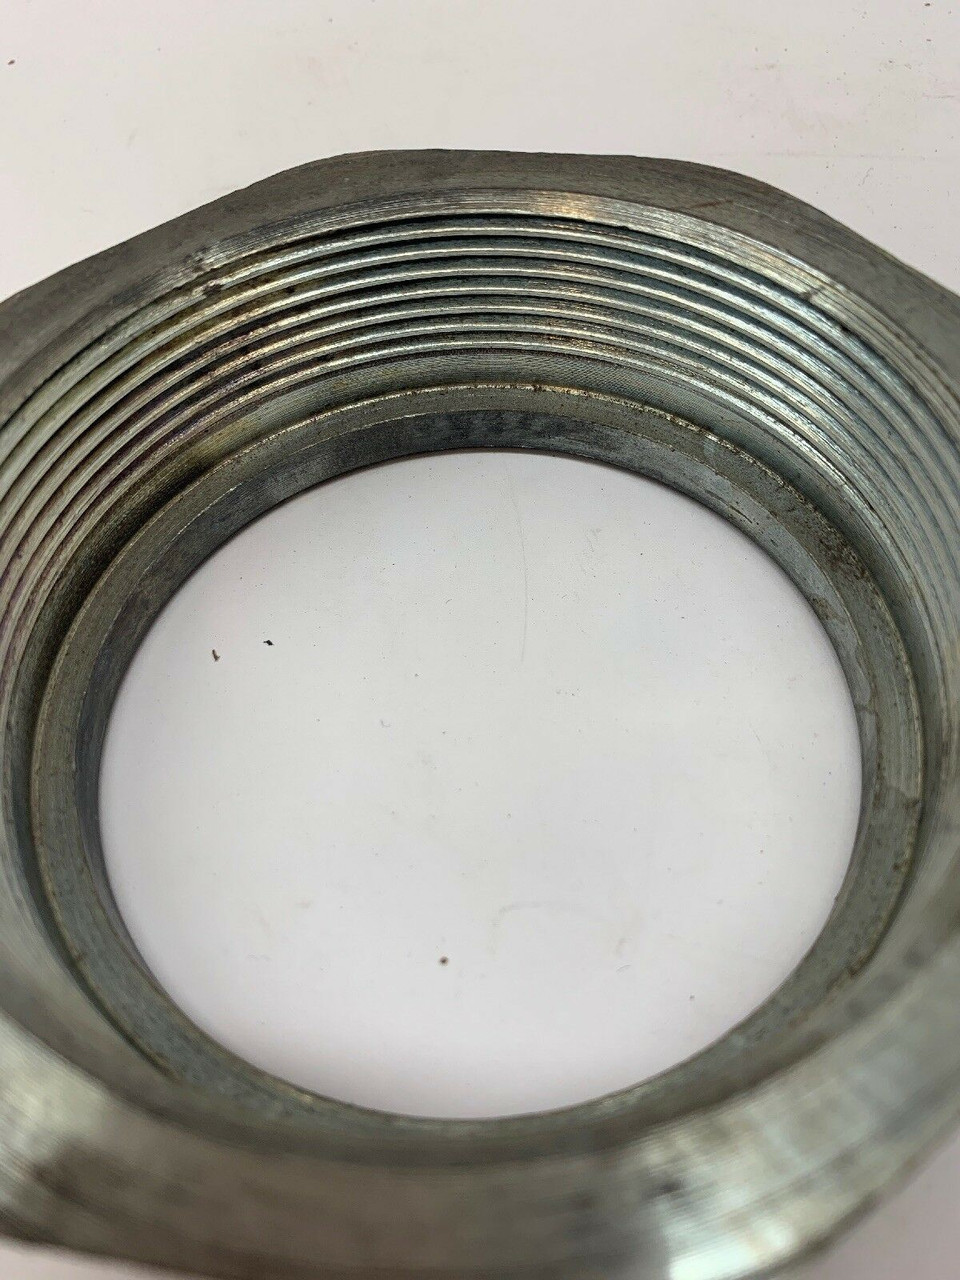 Union Coupling Nut B61 H004A Threaded 3"